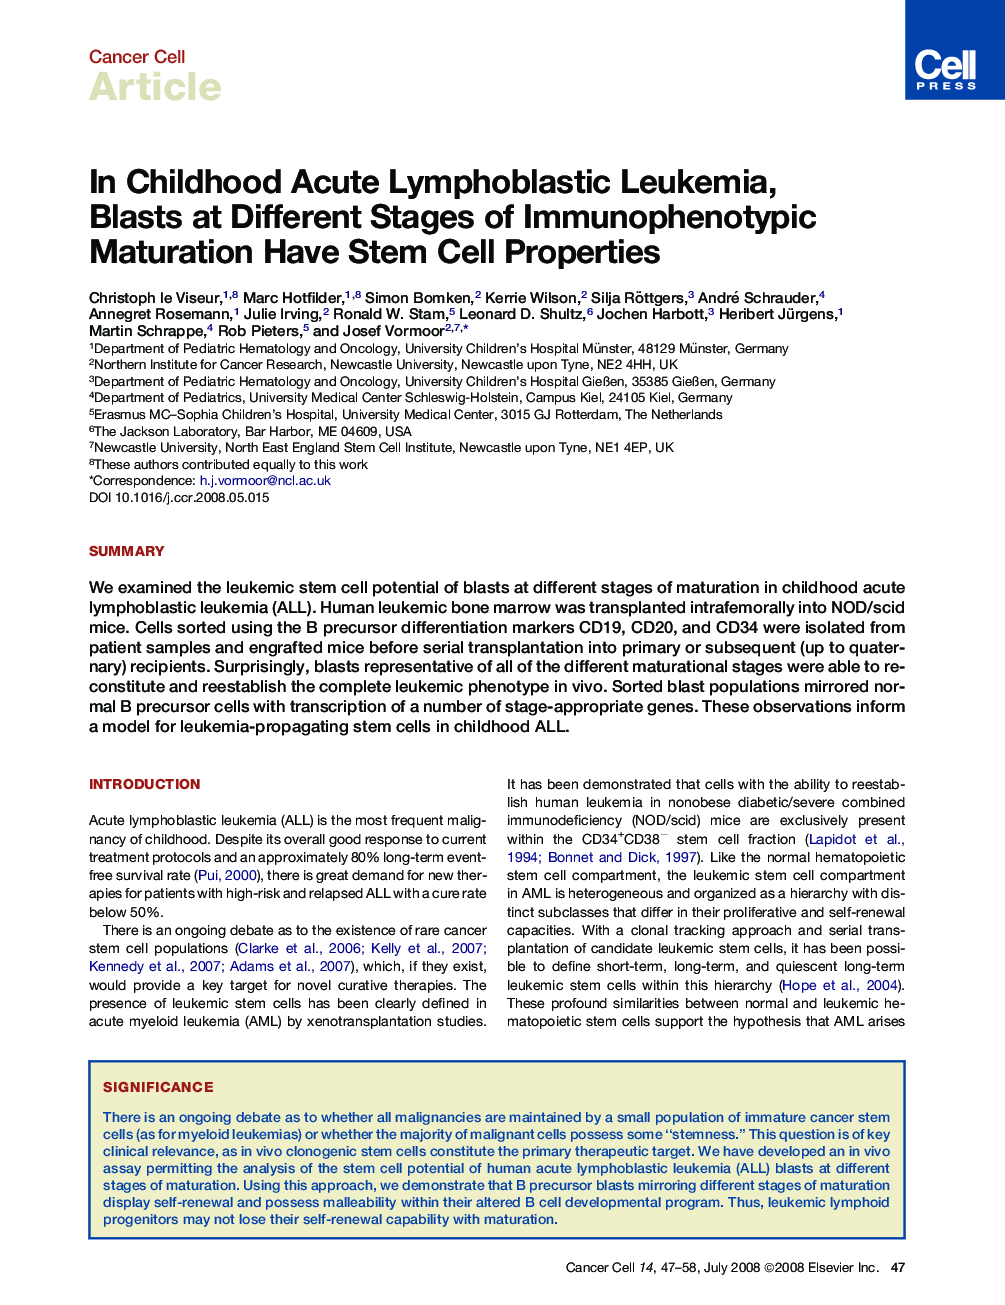 In Childhood Acute Lymphoblastic Leukemia, Blasts at Different Stages of Immunophenotypic Maturation Have Stem Cell Properties